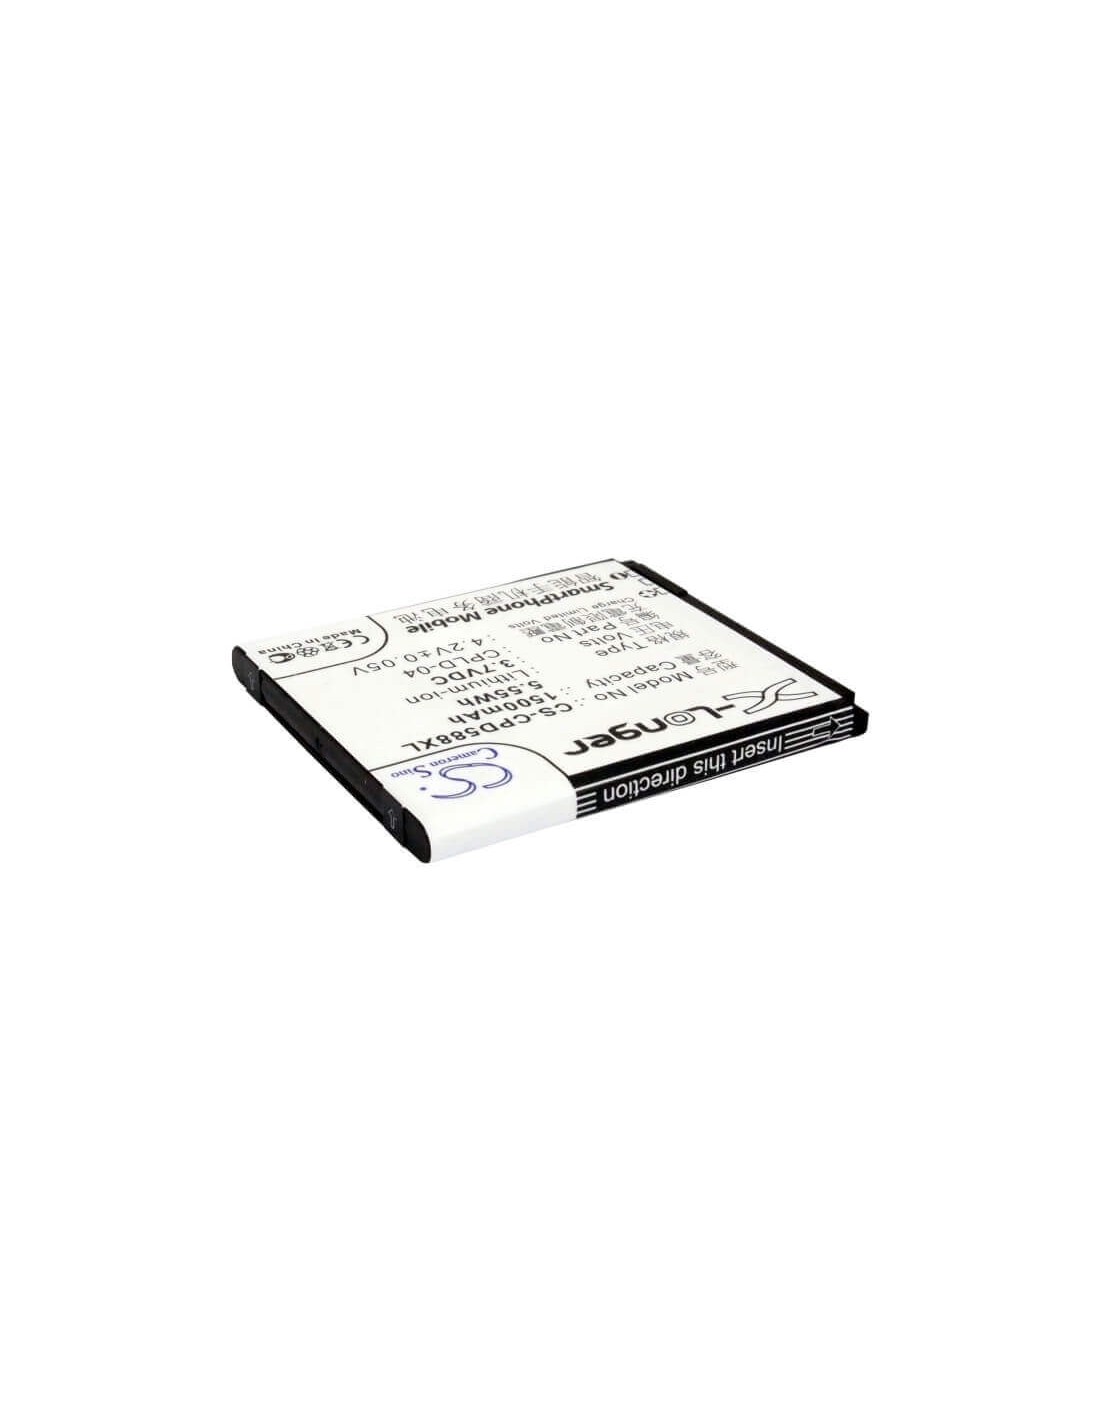 Battery for Coolpad 5880 3.7V, 1500mAh - 5.55Wh